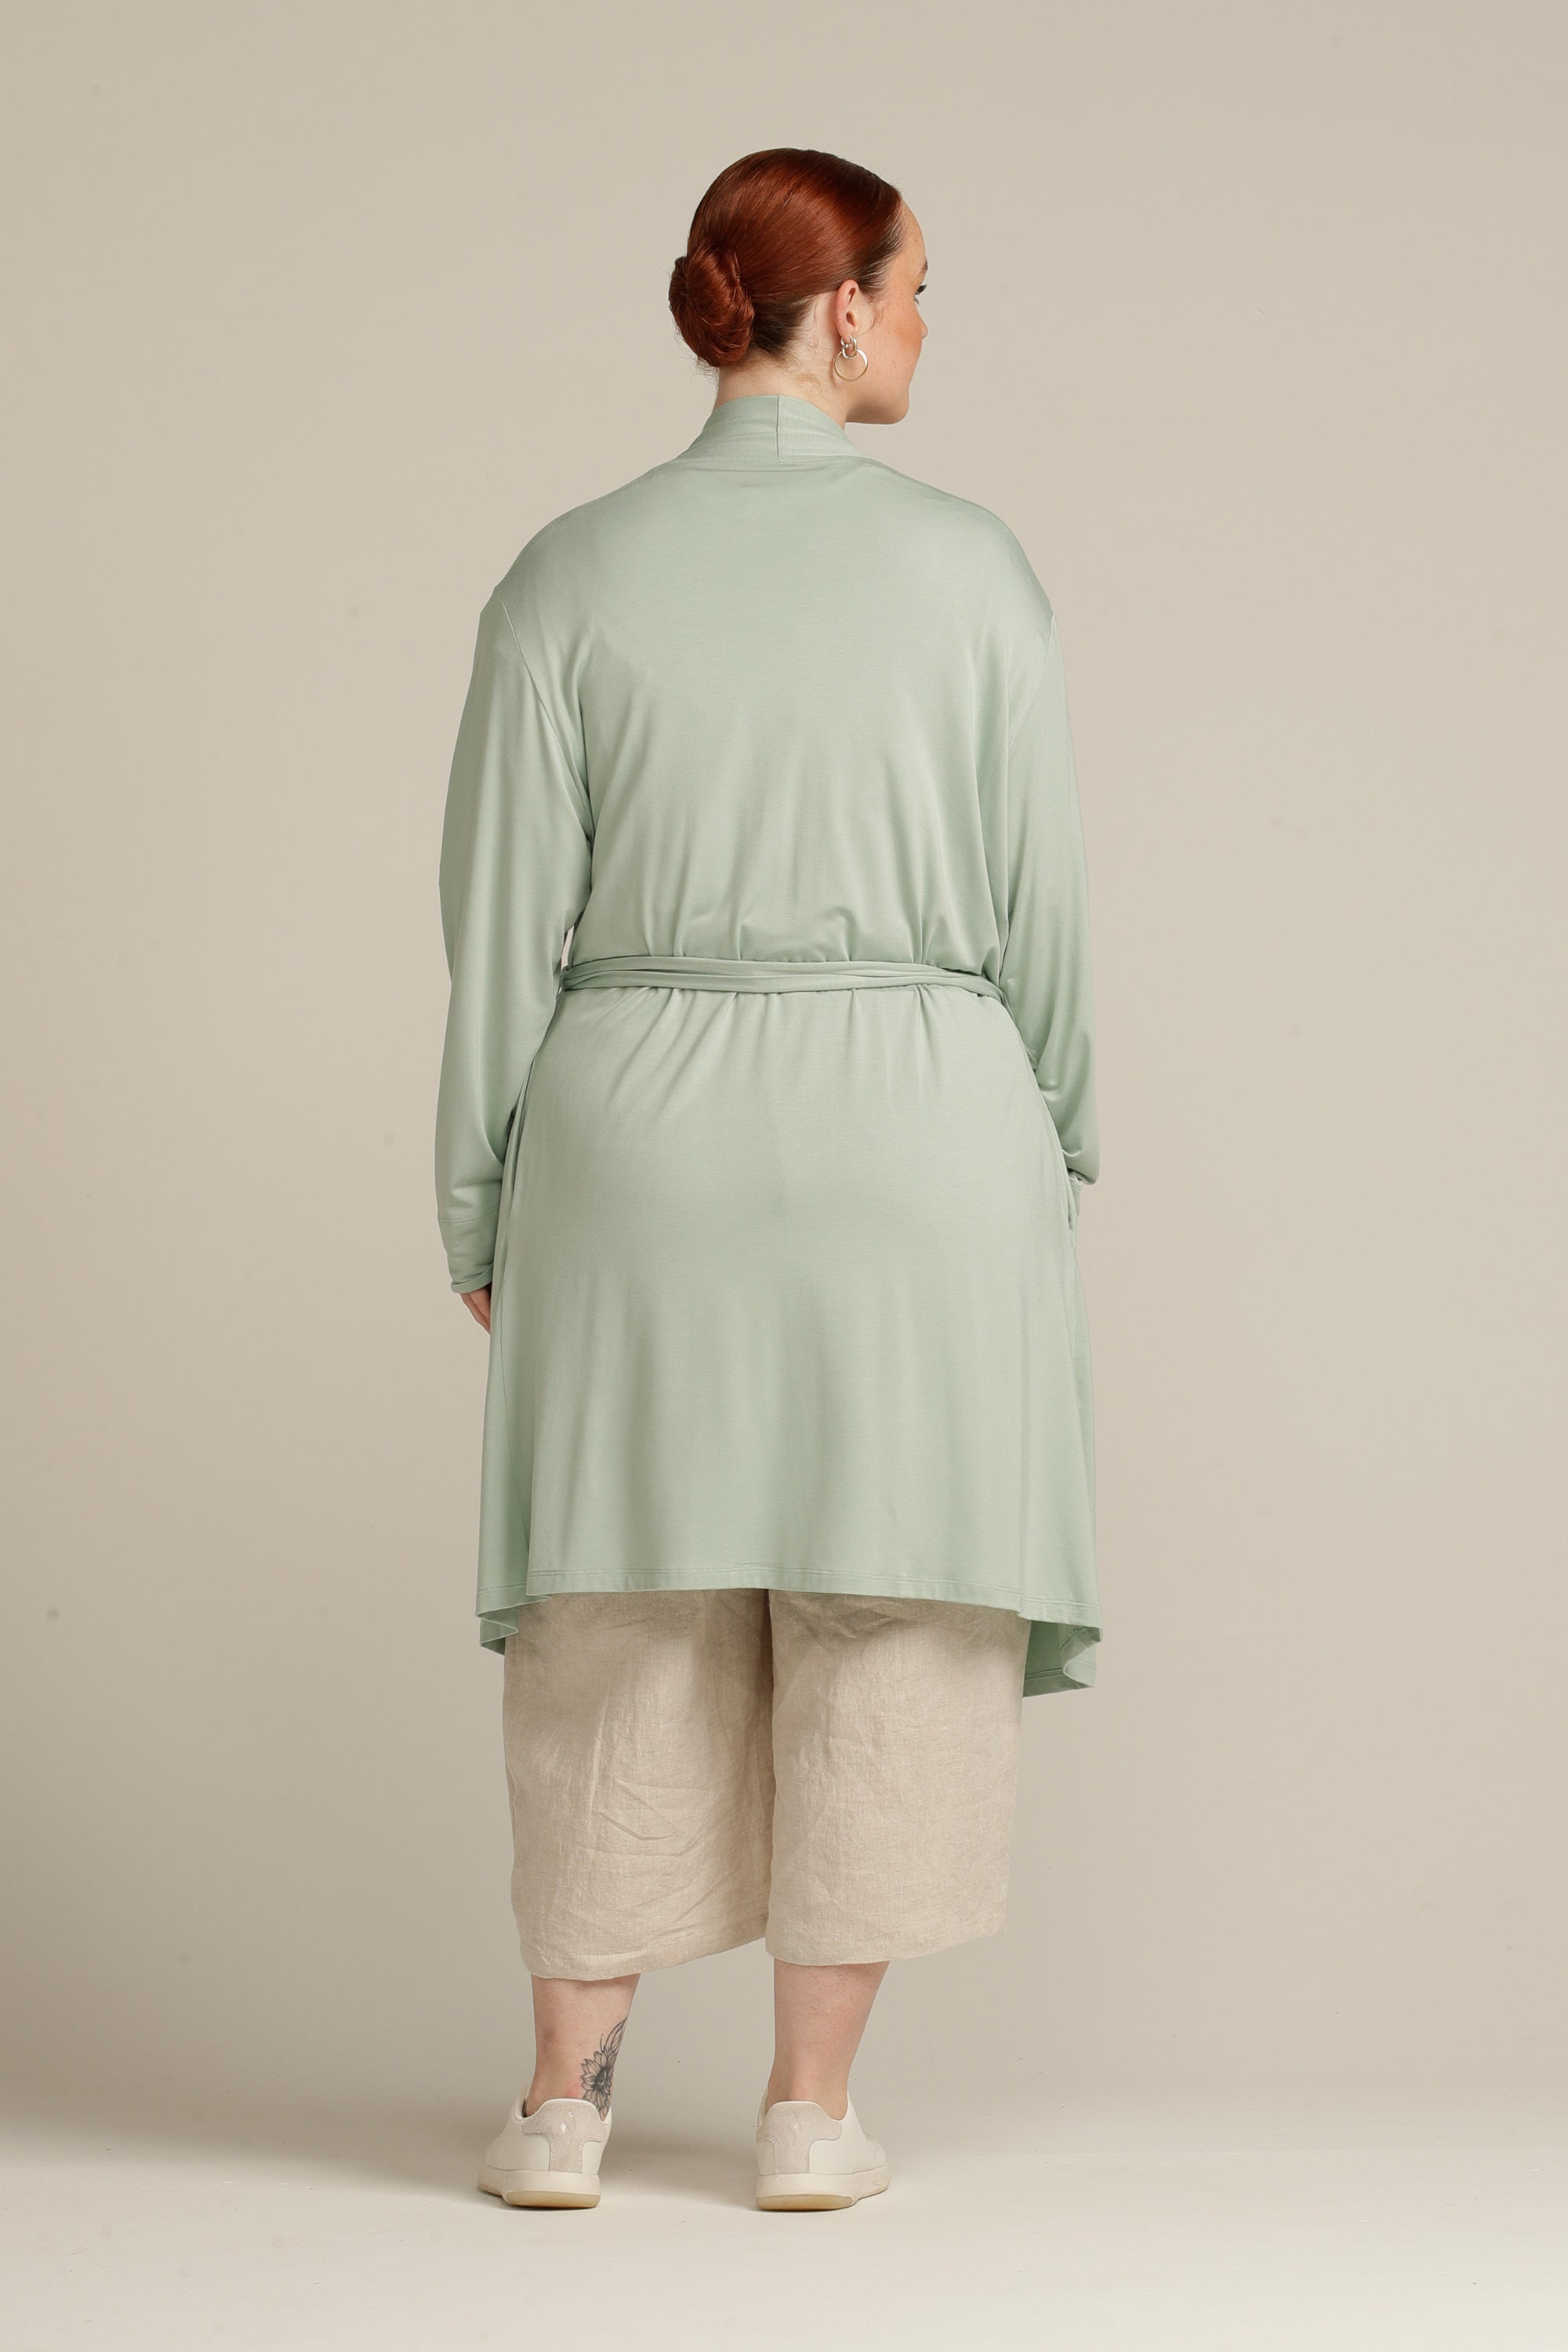 Back view plus size woman in mint cardigan